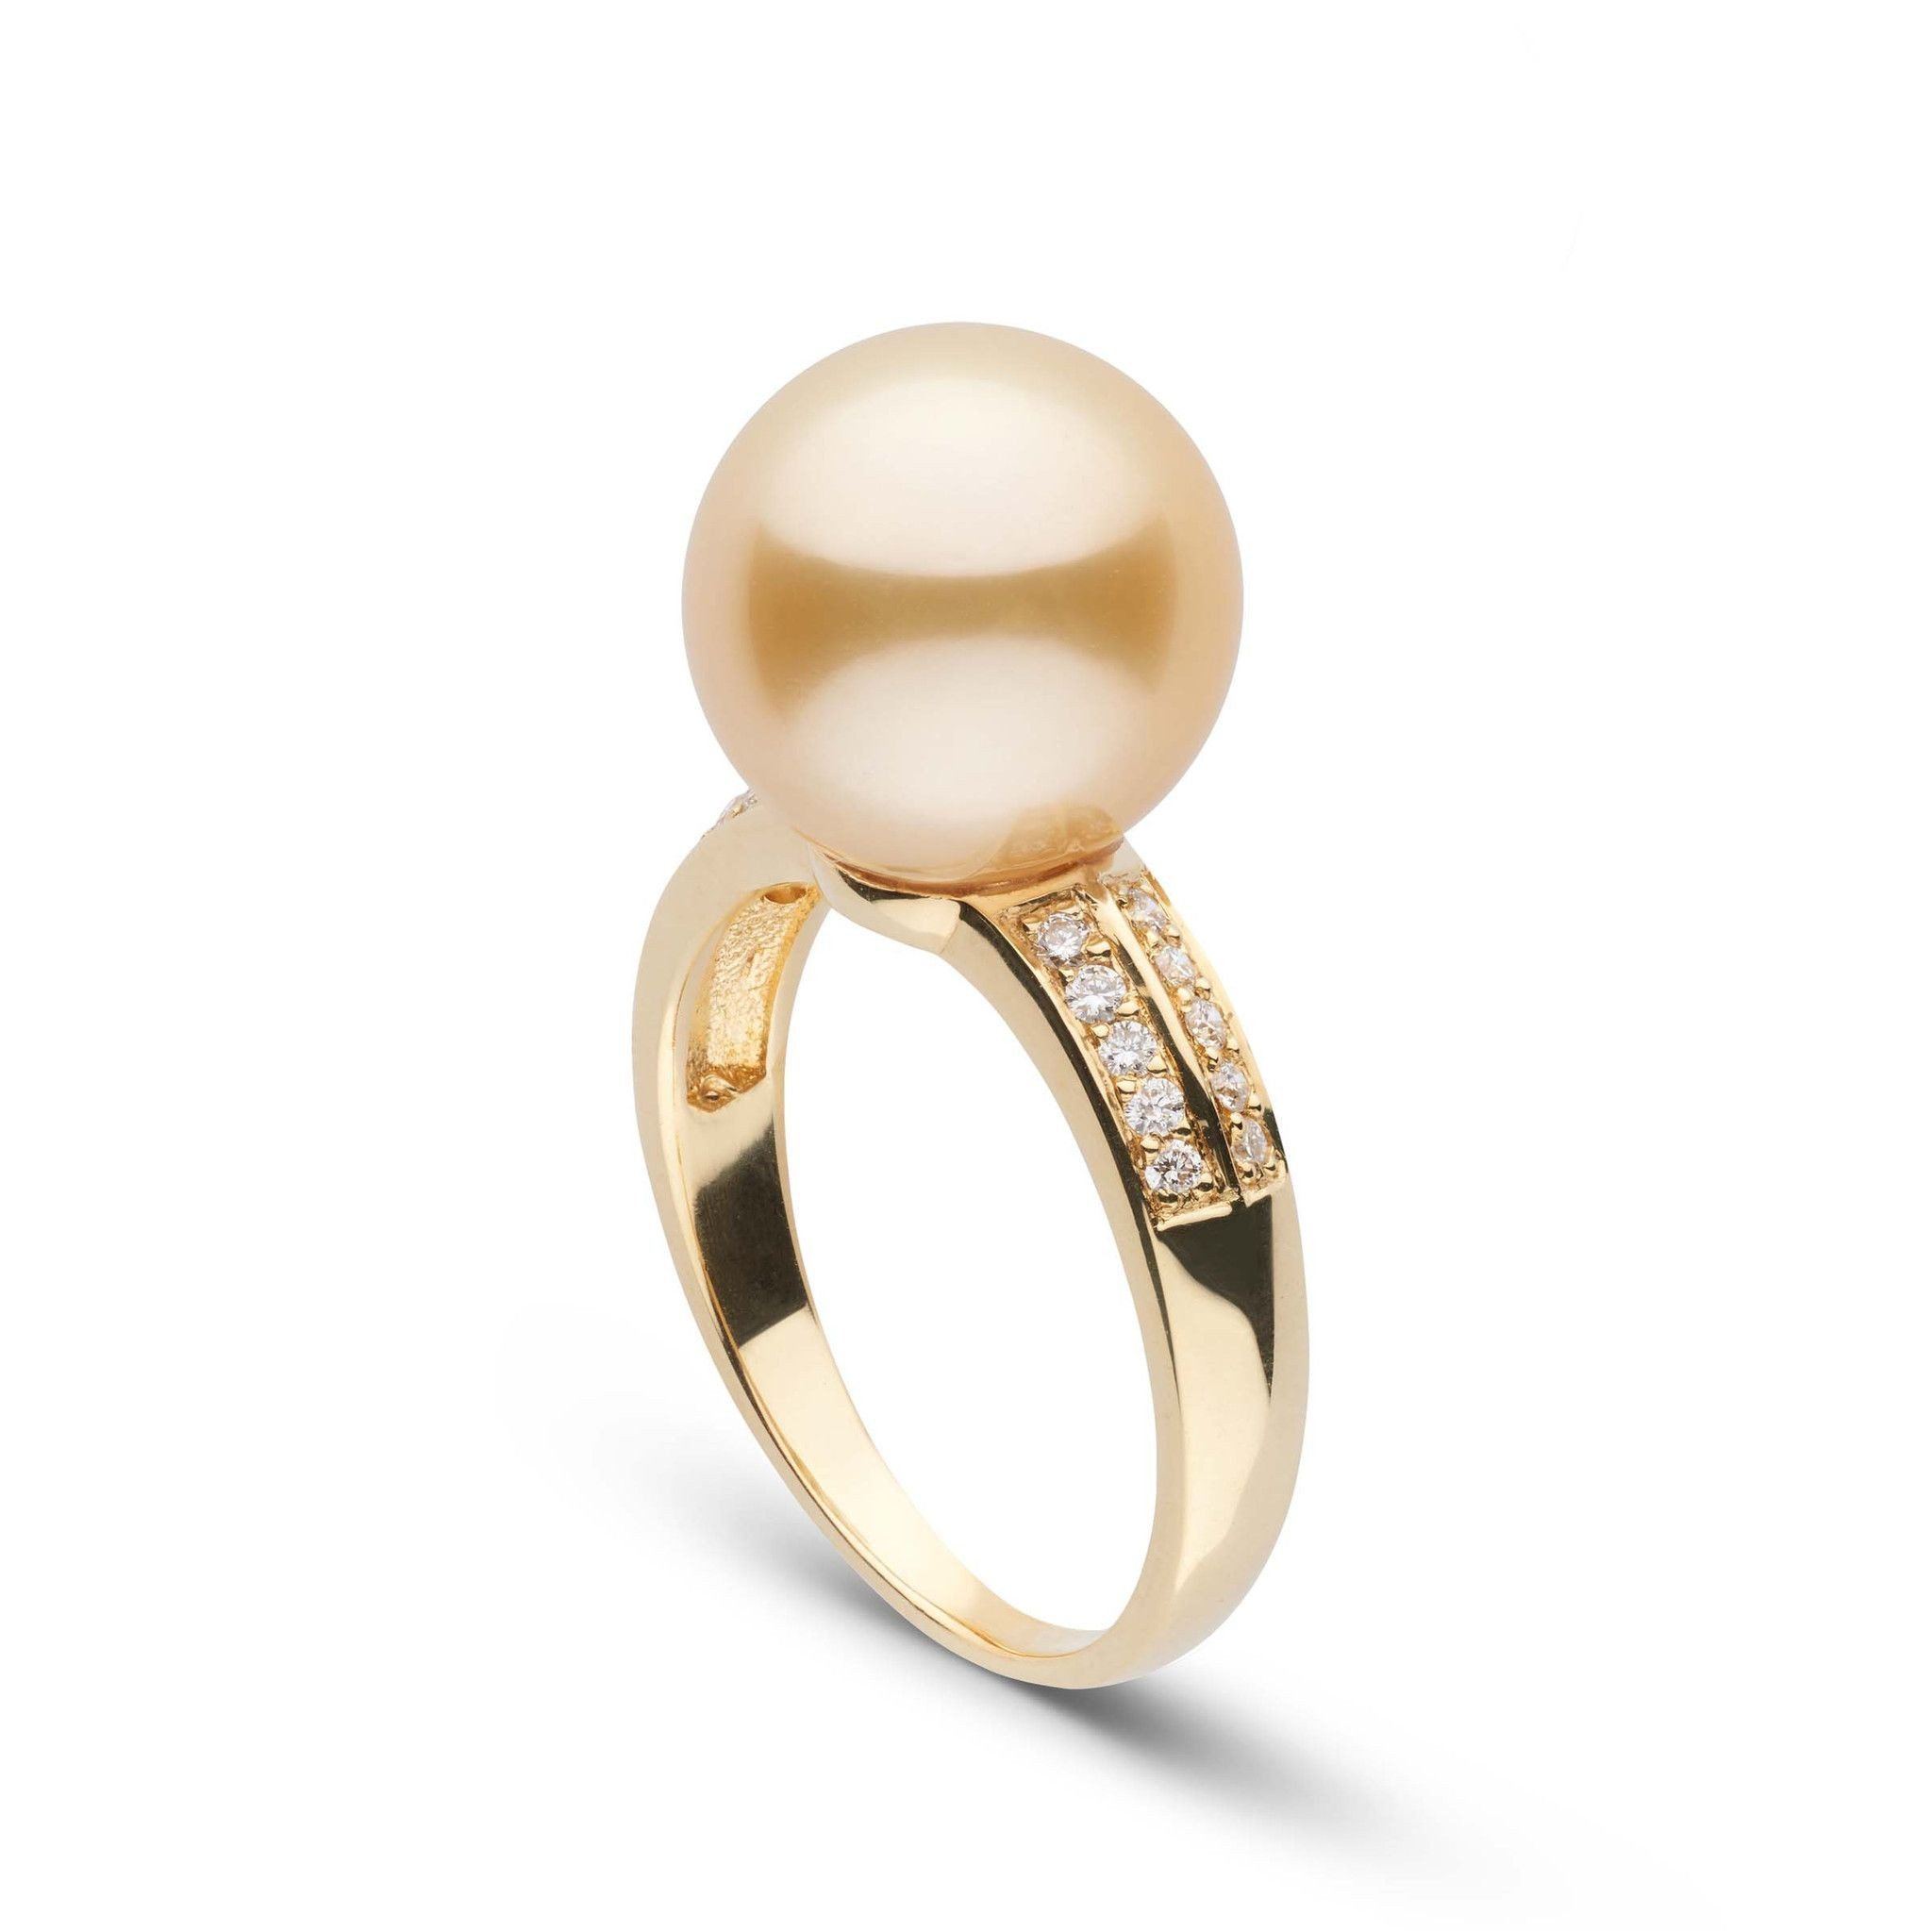 Golden South Sea Pearls